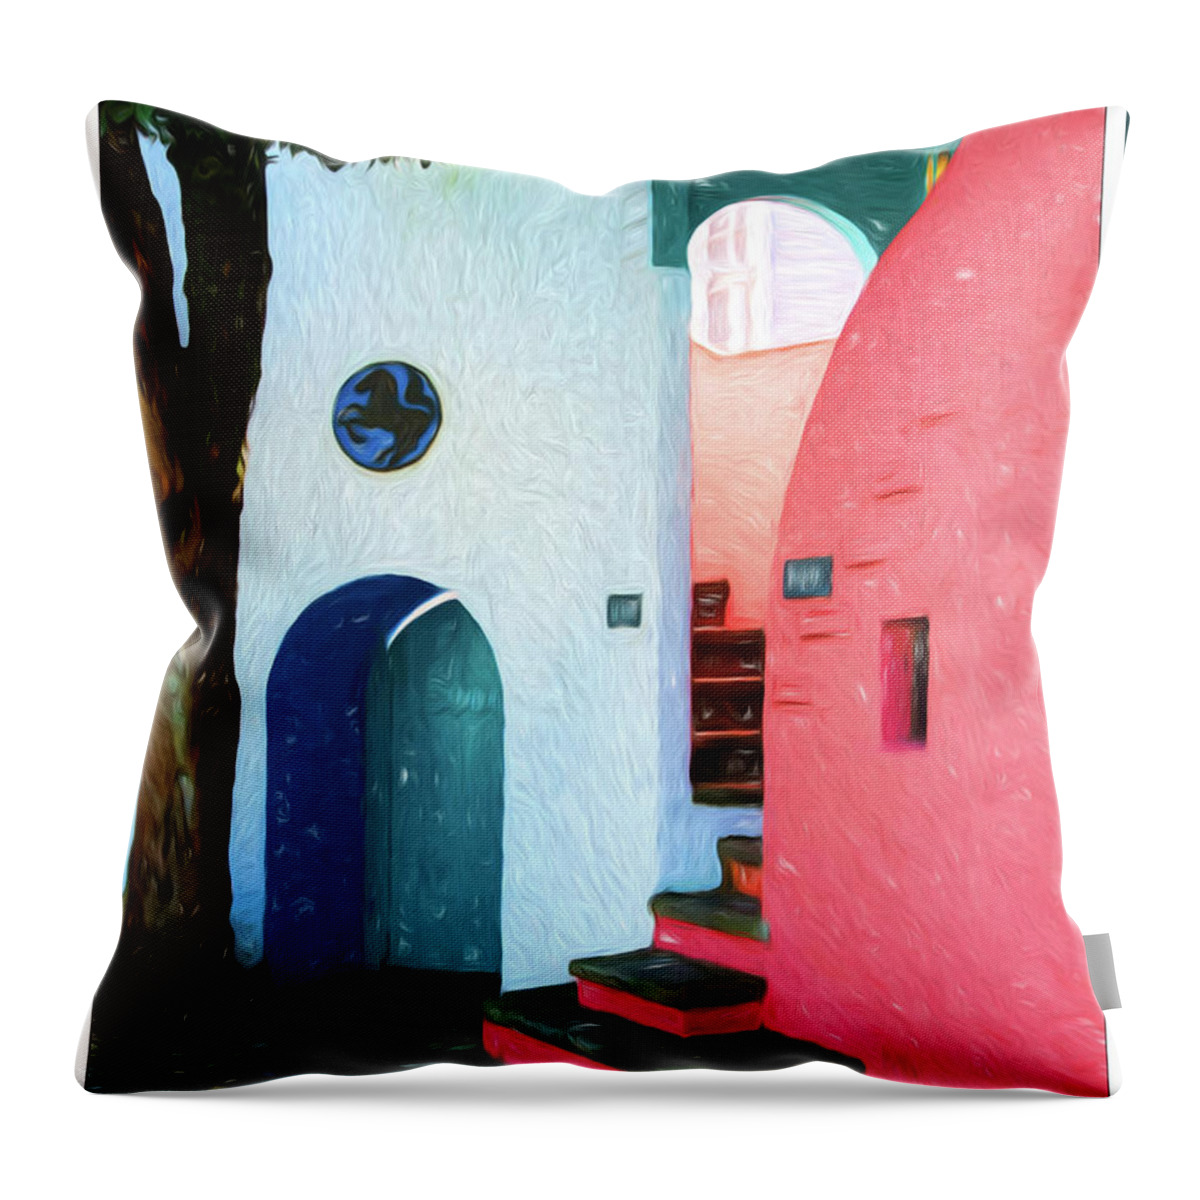 Resort Throw Pillow featuring the photograph Port Meirion, Wales by Peggy Dietz